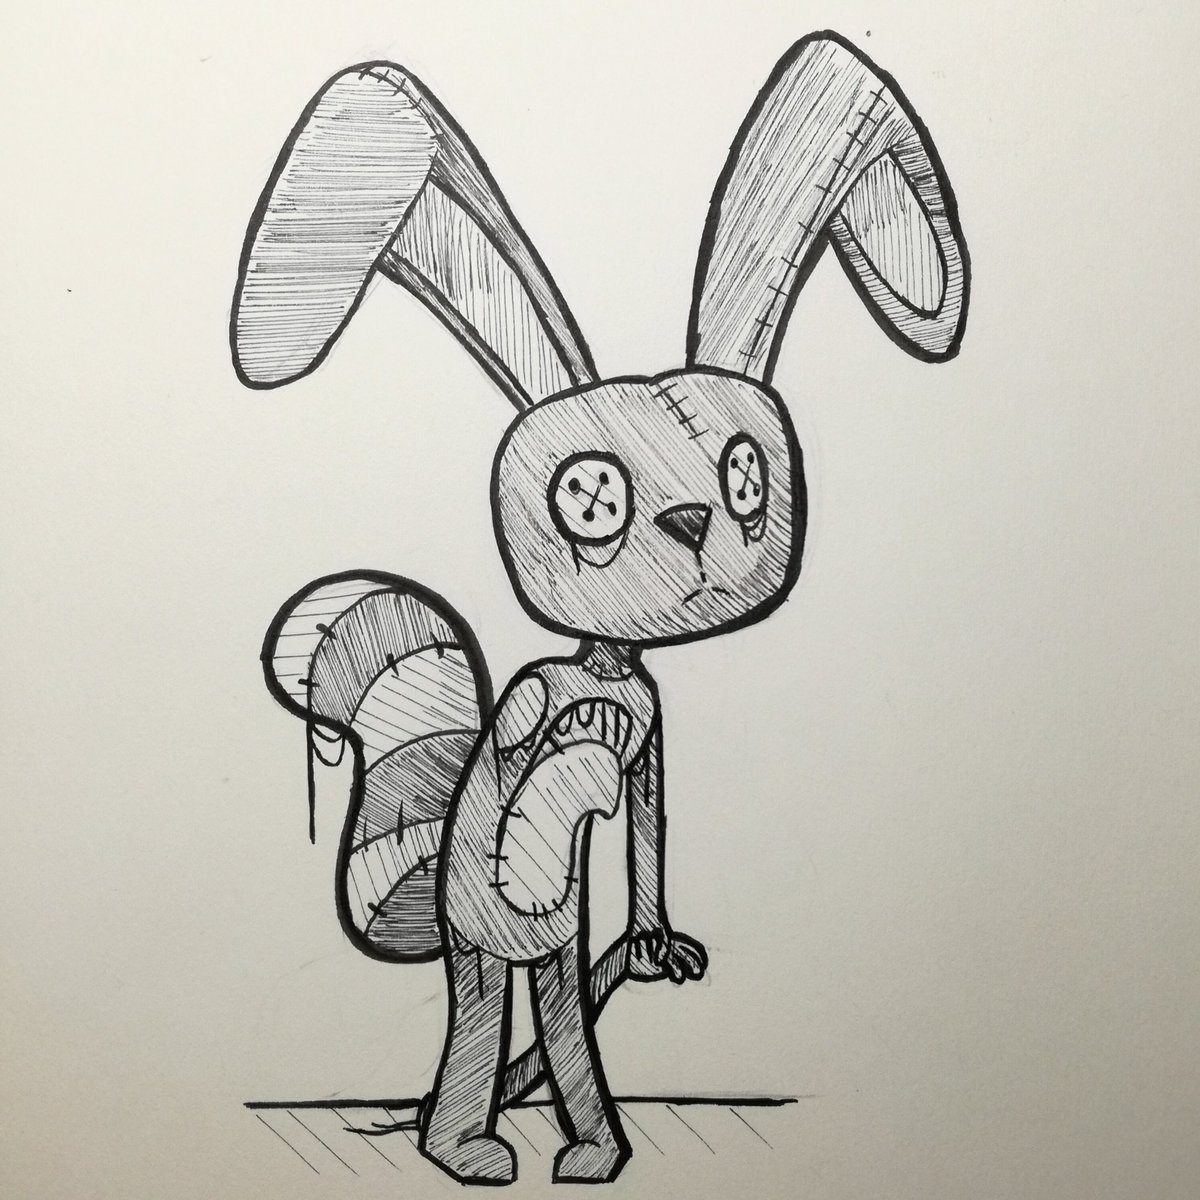 Rocki on X: For the 9th day of #Inktober I drew @KaseyTheGolden 's Hatch  as a creppy bunny plush #Inktober2018 #sketchbook #sketch #creppy #bunny   / X